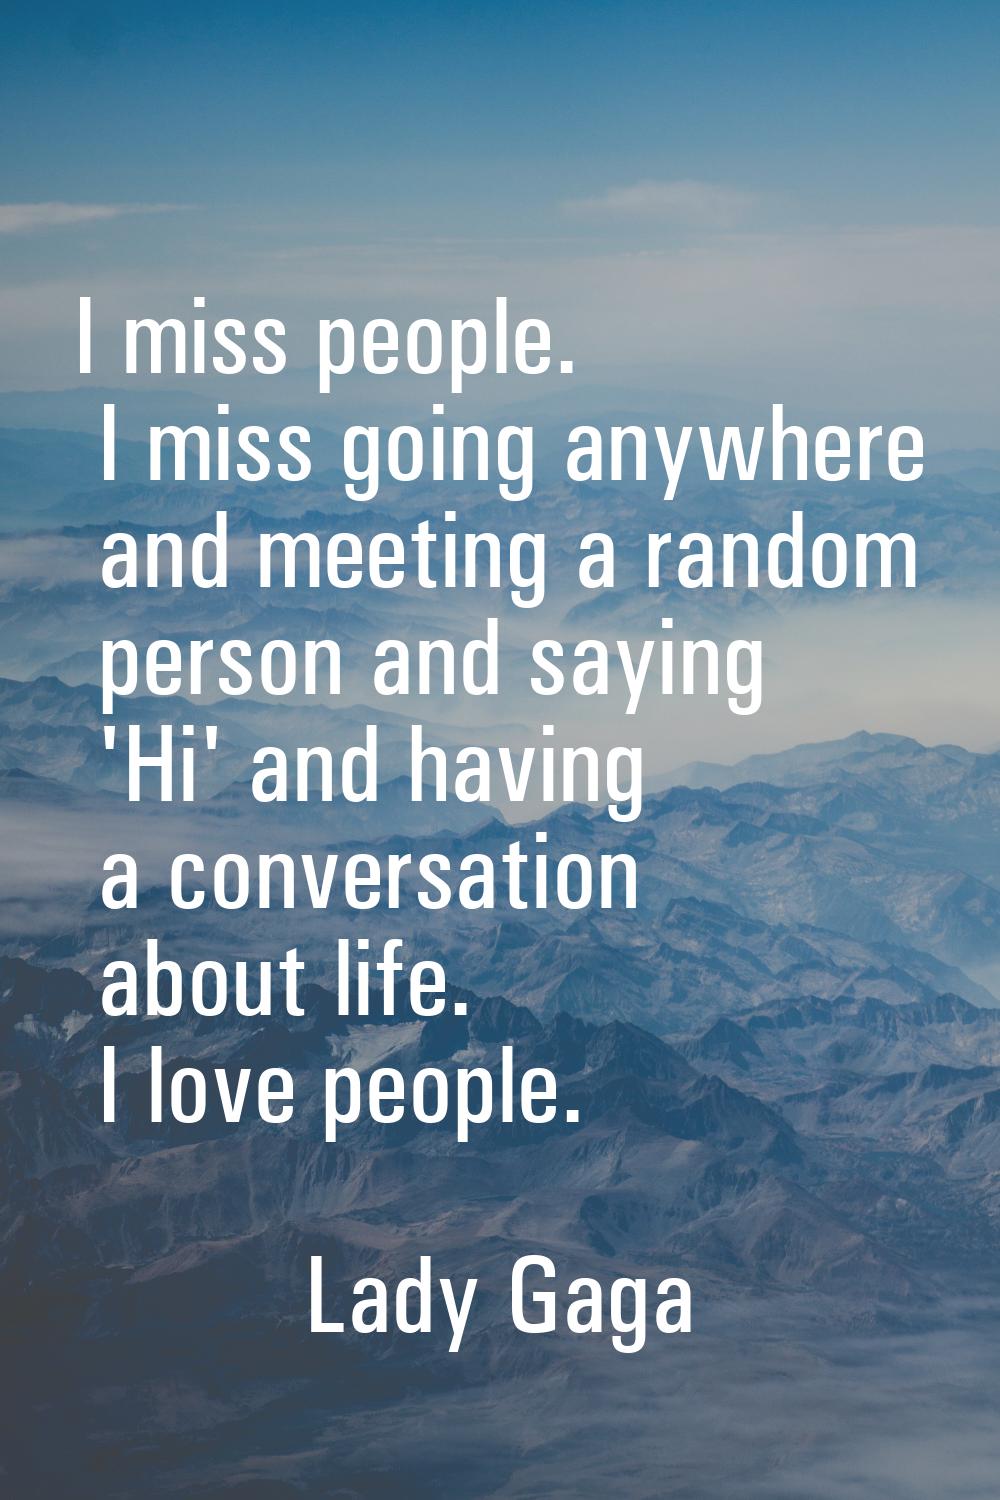 I miss people. I miss going anywhere and meeting a random person and saying 'Hi' and having a conve